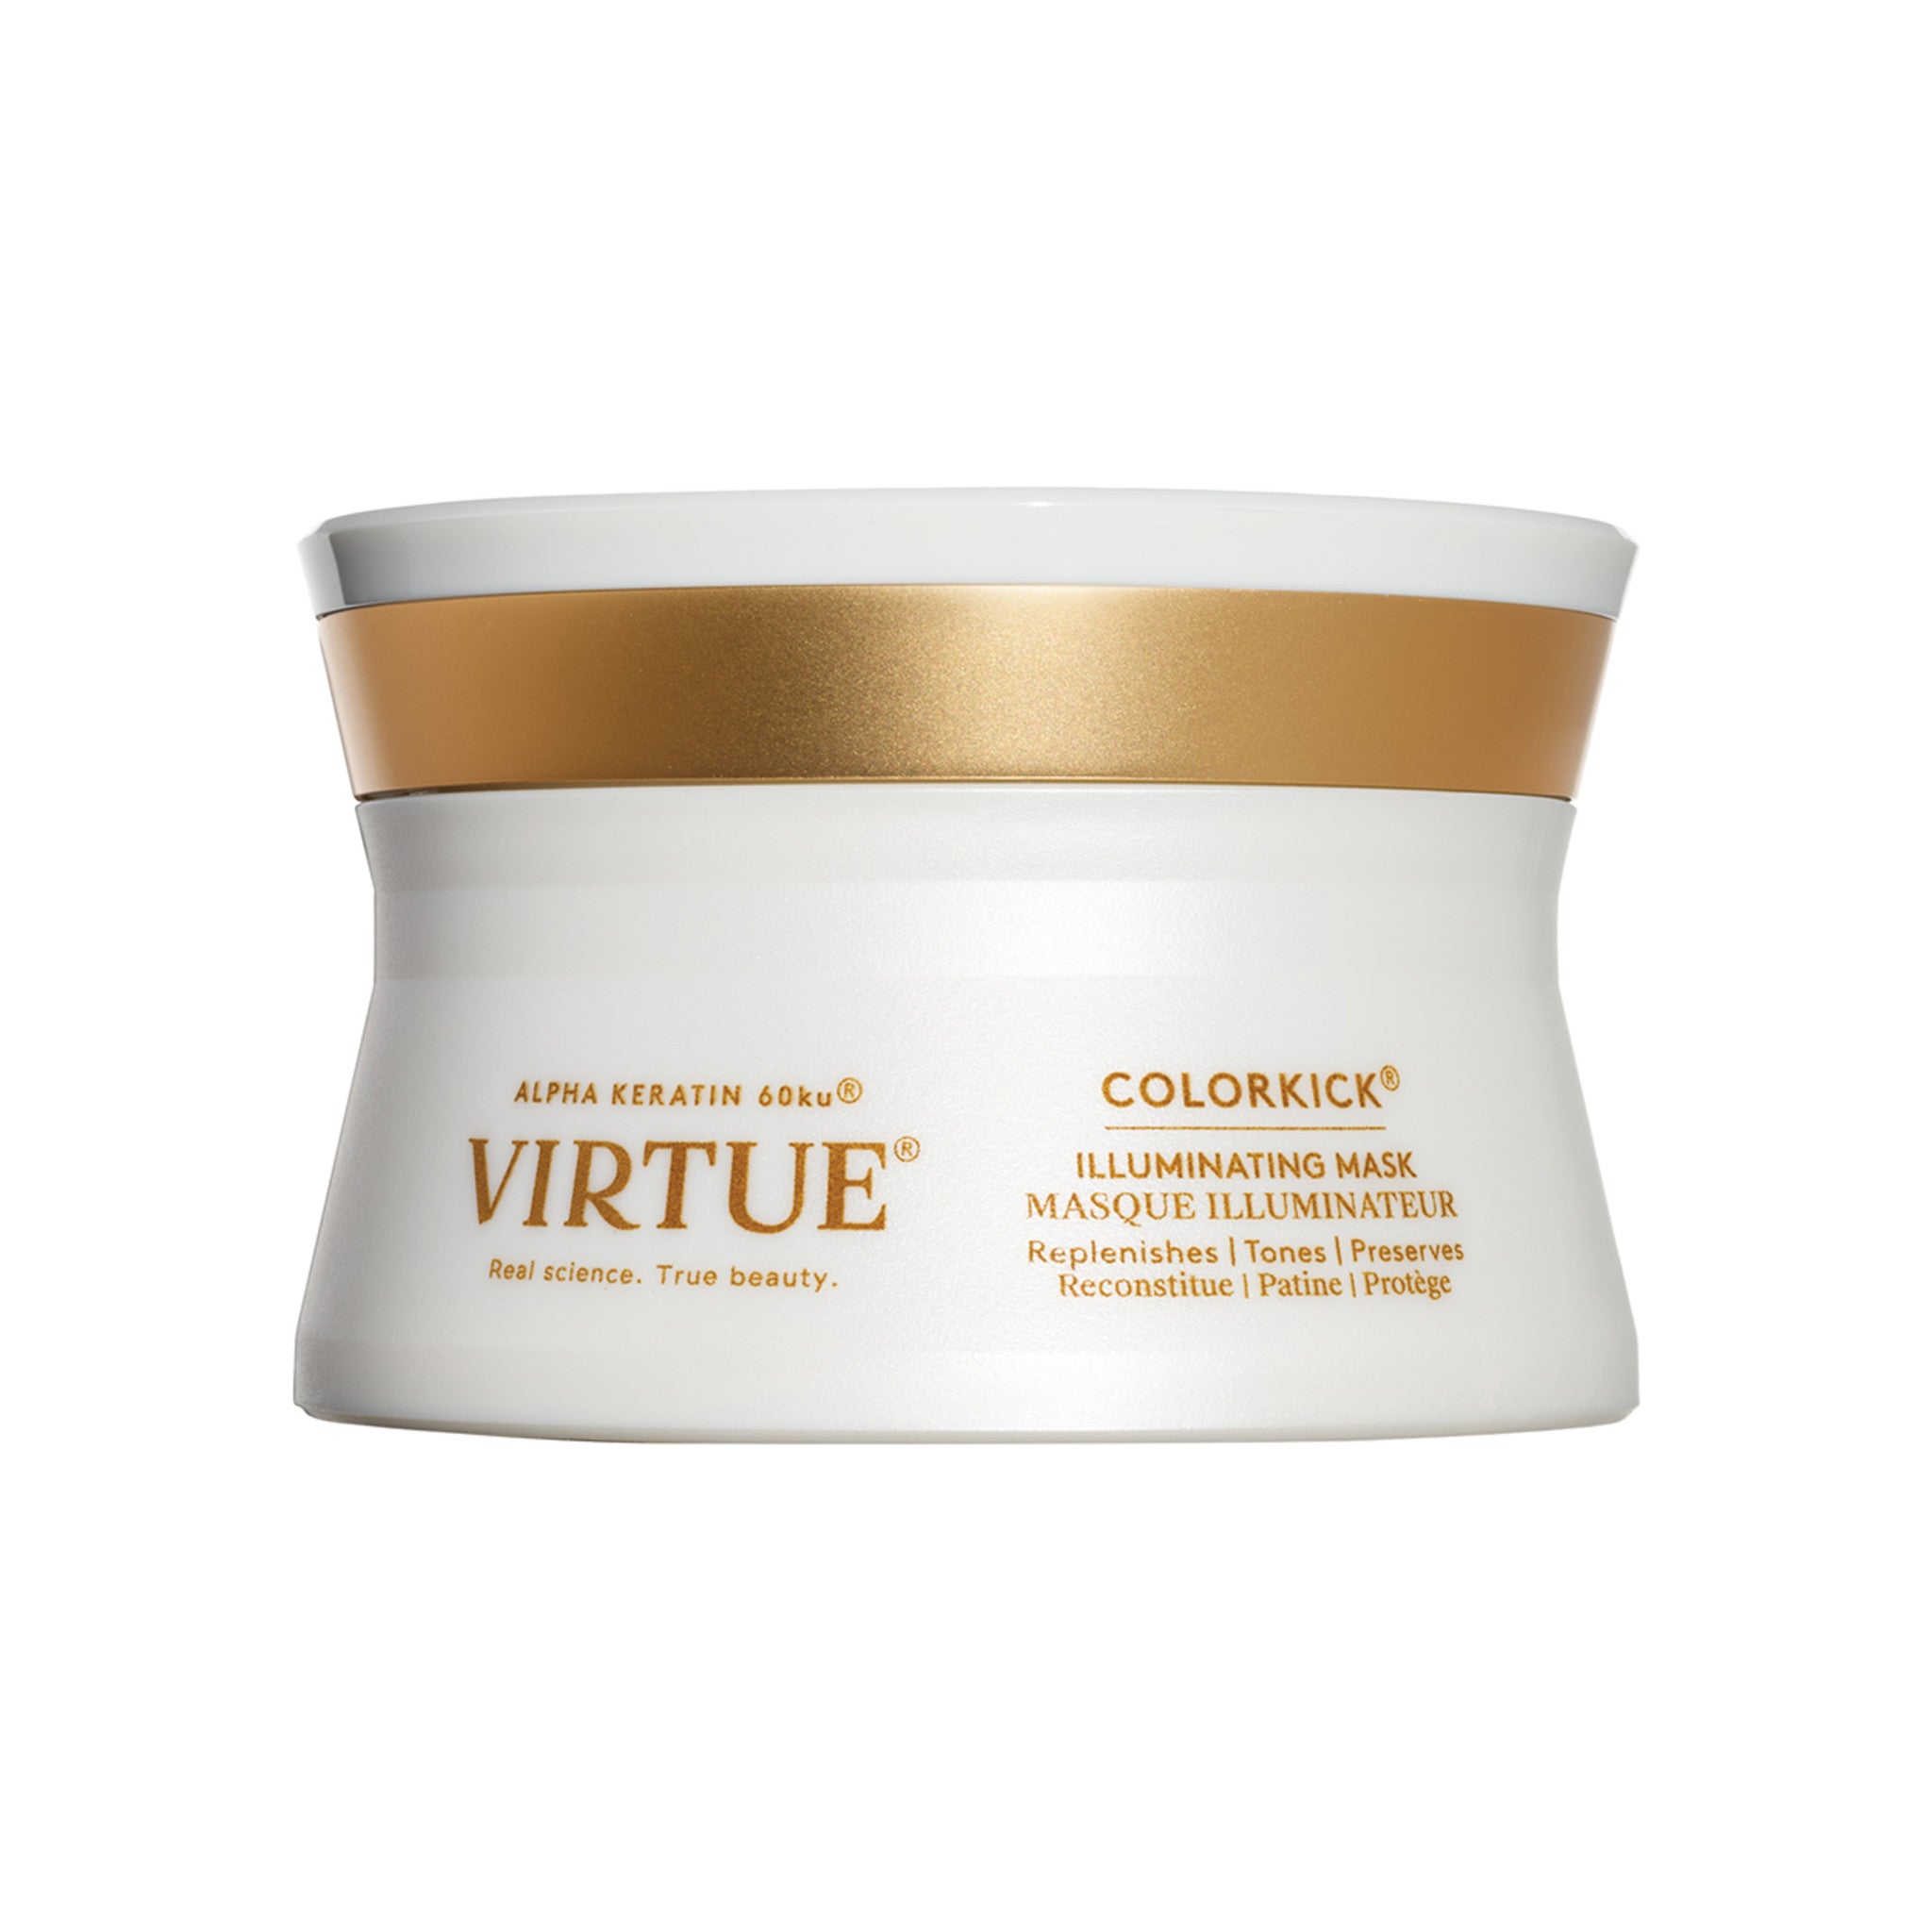 Virtue Colorkick Illuminating Mask main image. This product is for blonde hair